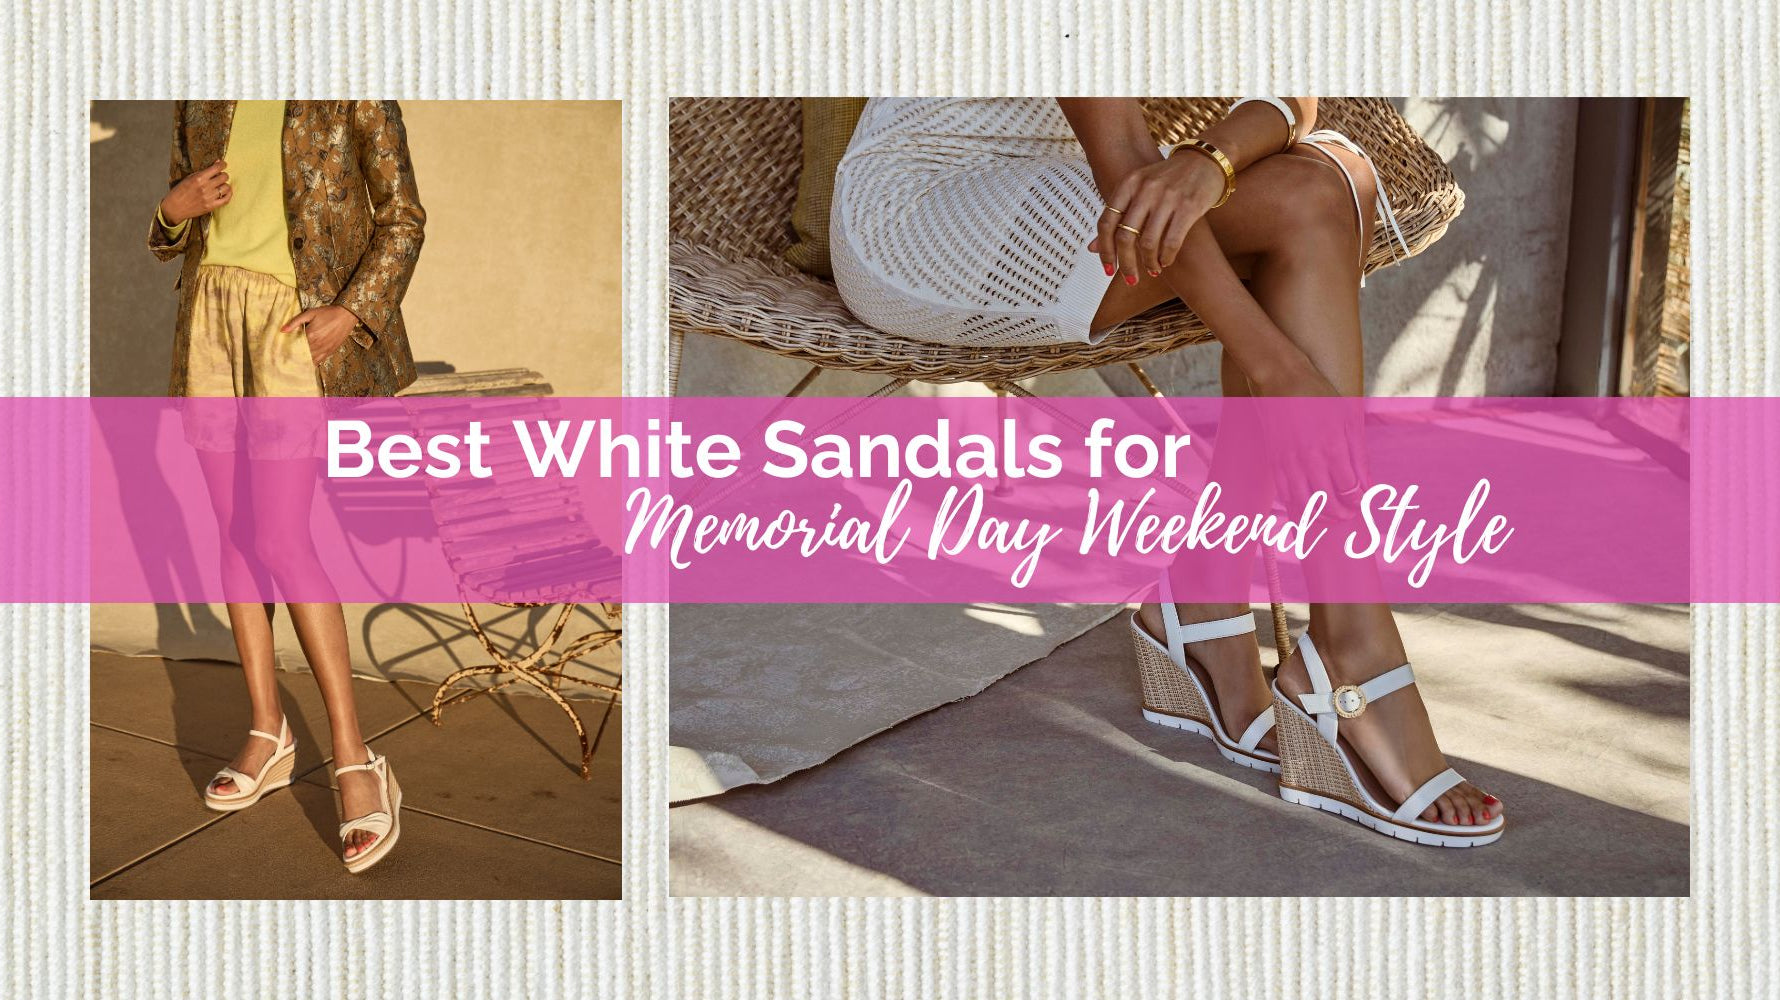 Best White Sandals for Memorial Day Weekend Style